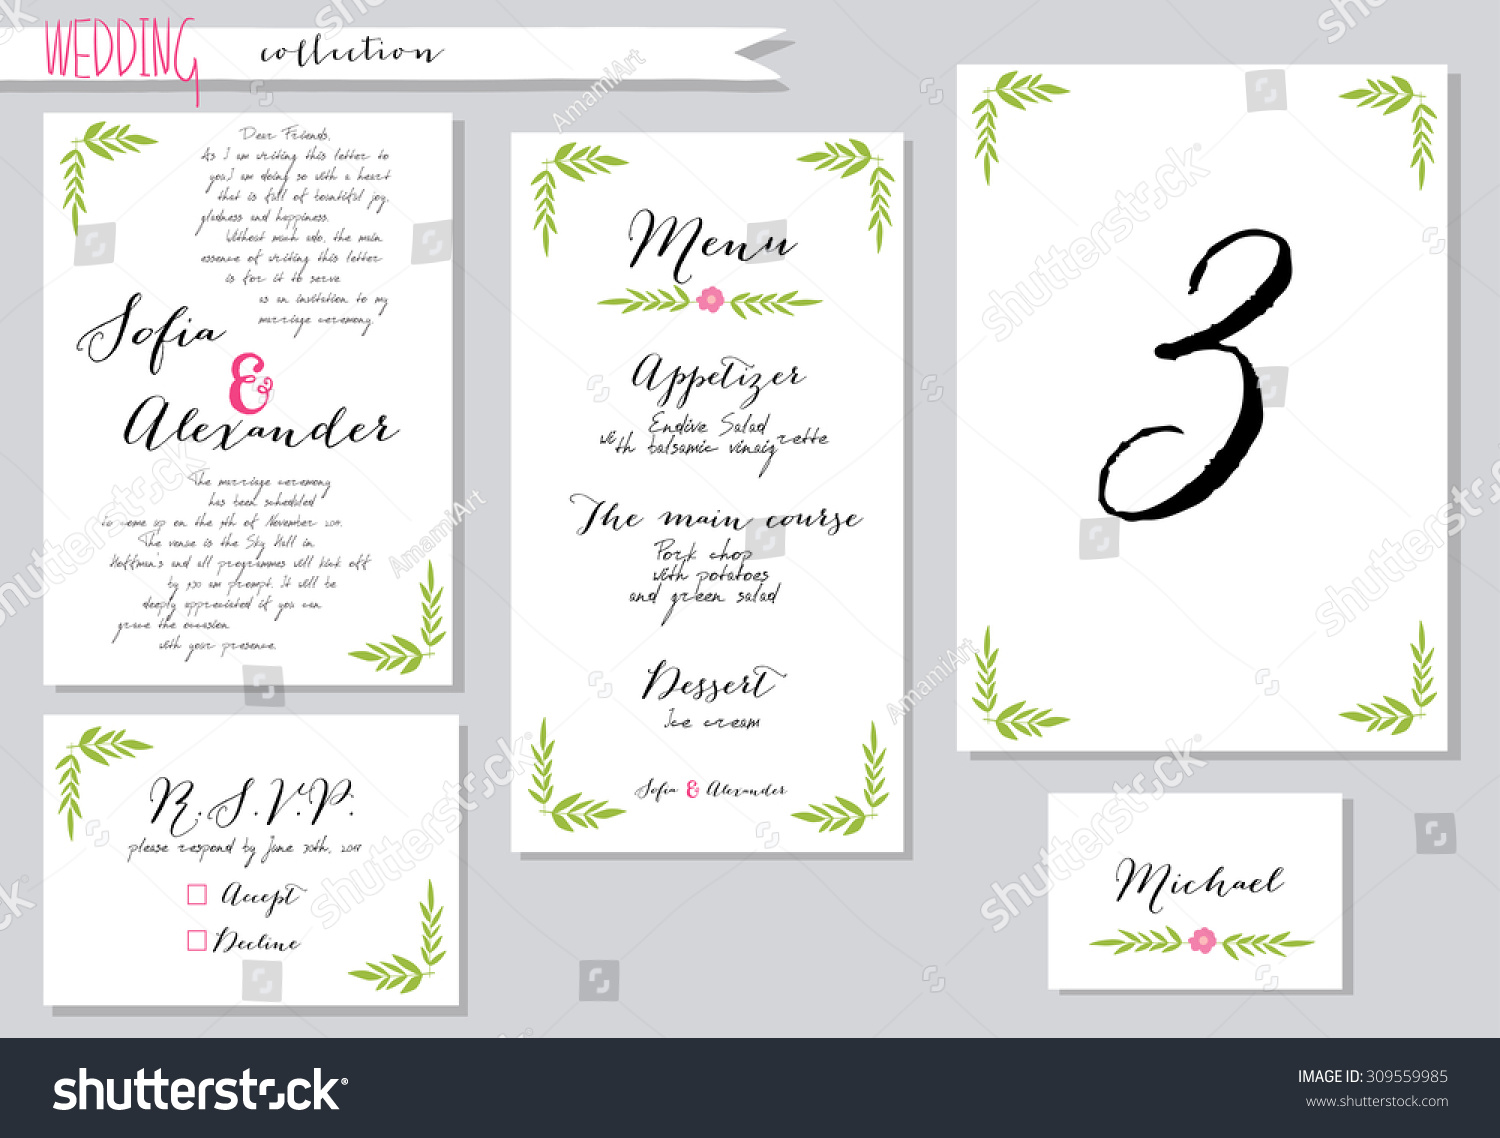 Vector illustration.Collection of wedding invitation templates with pink flowers. Wedding, marriage, save the date. Stylish simple design.  #309559985